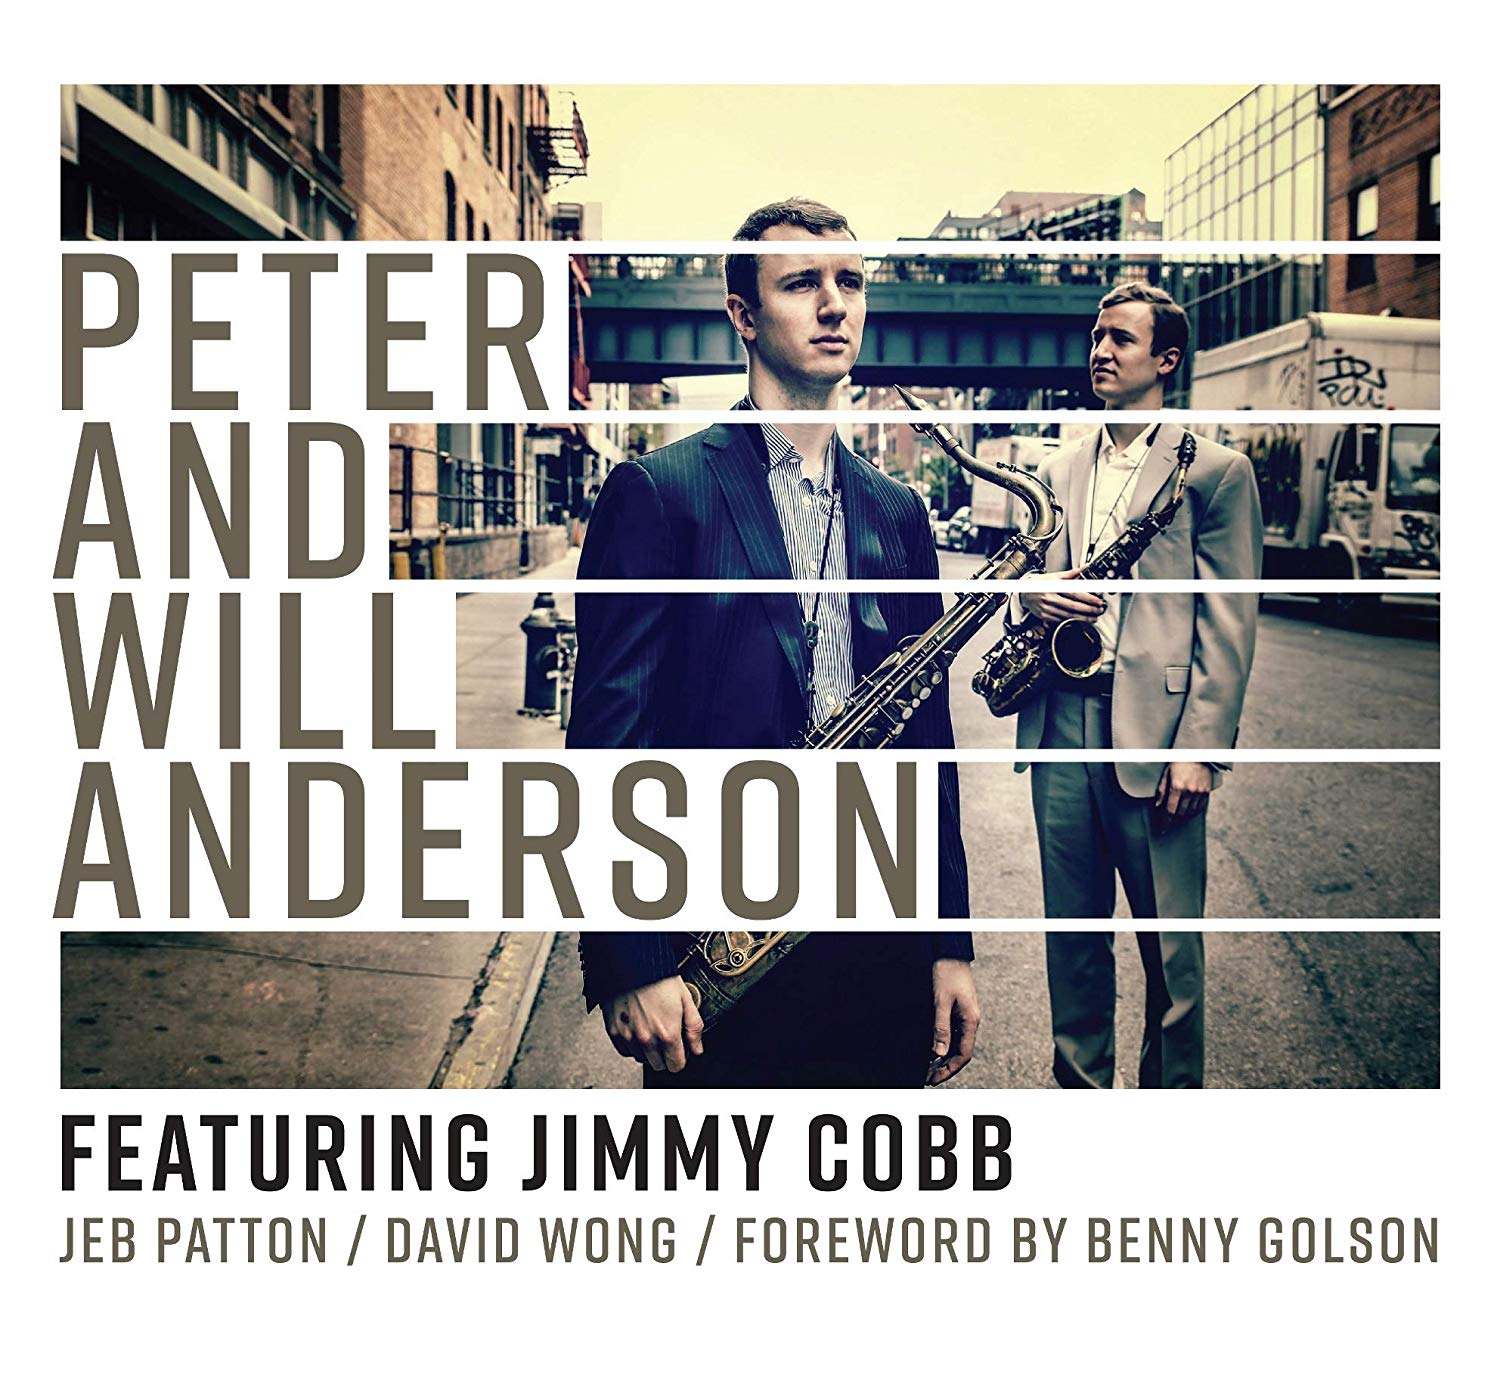 PETER AND WILL ANDERSON - Peter And Will Anderson featuring Jimmy Cobb cover 